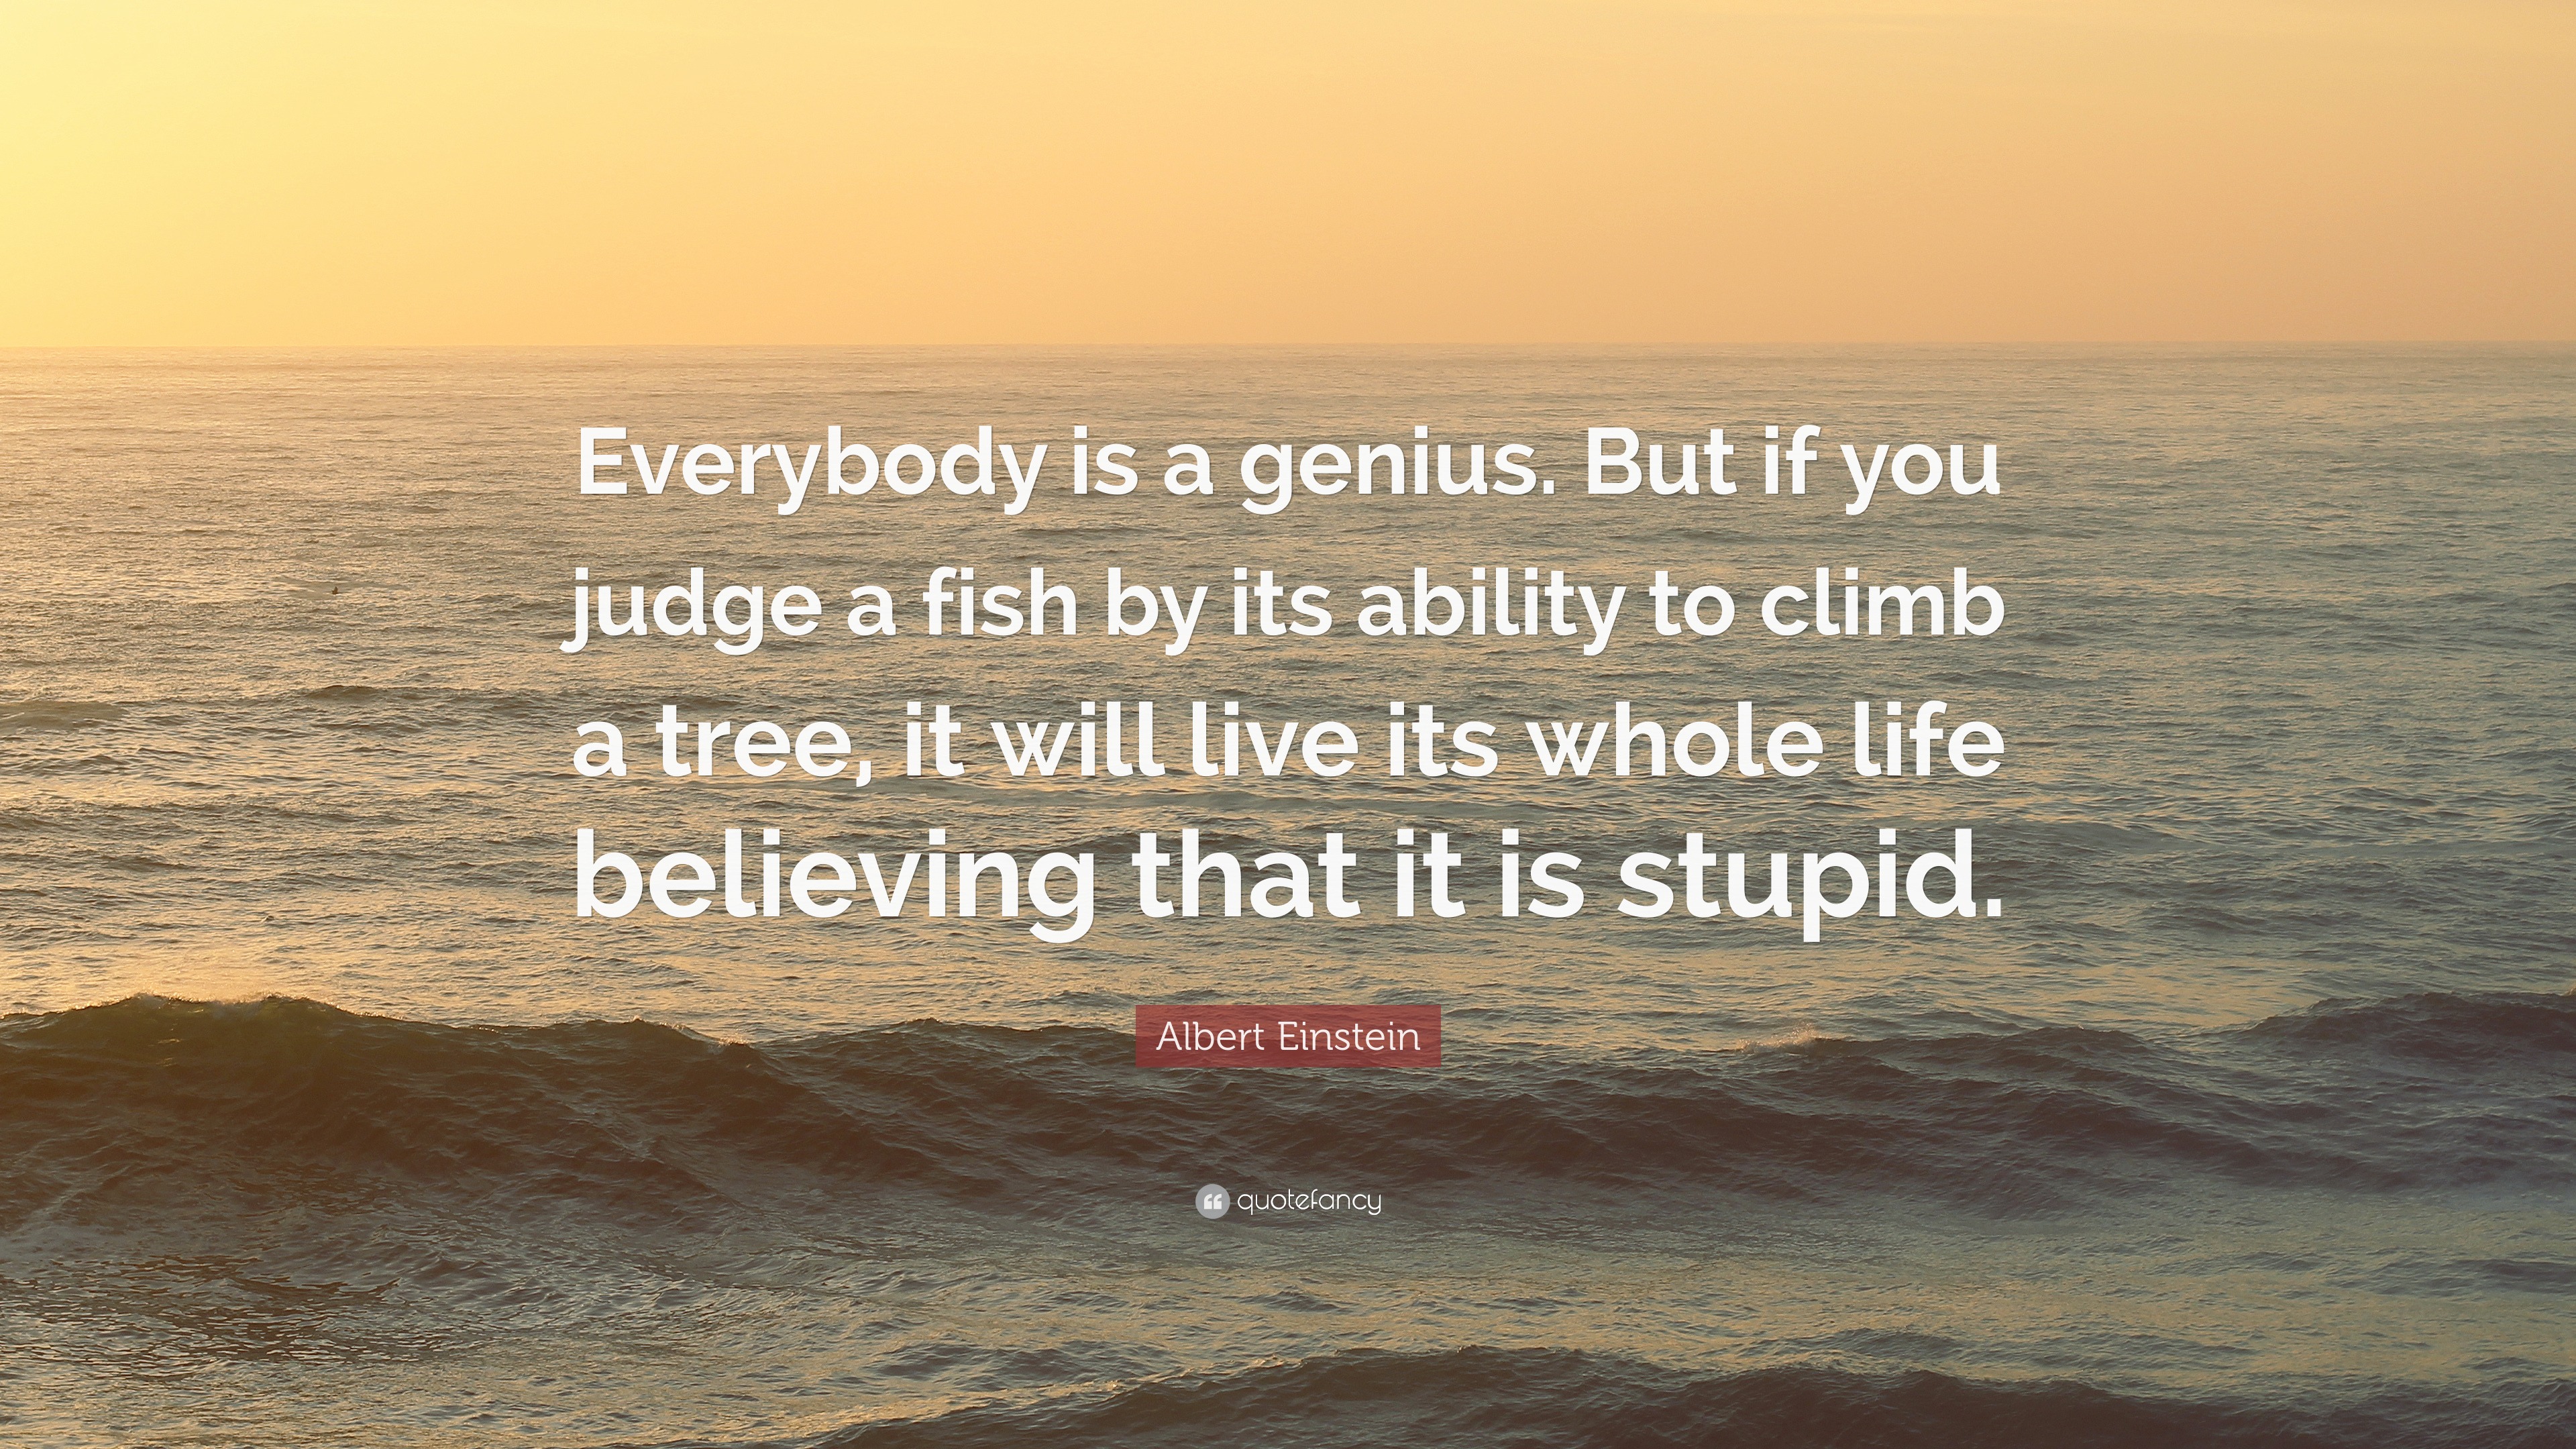 Albert Einstein Quote “Everybody is a genius. But if you judge a fish